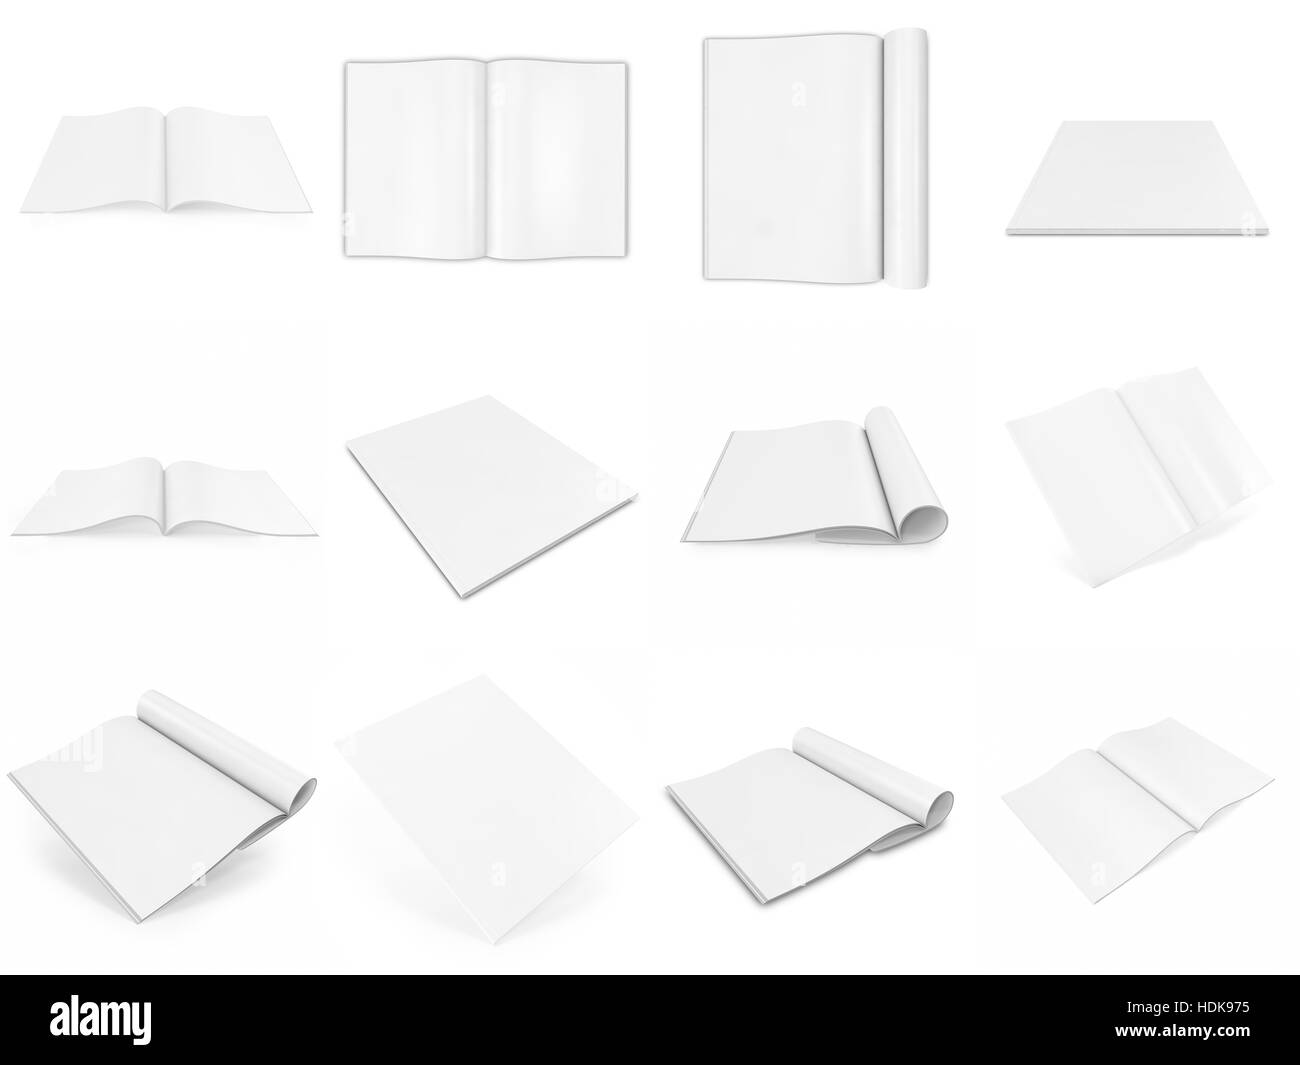 Realistic set of 3d rendering open and closed books or journal with blank white cover isolated on  background. Stock Photo